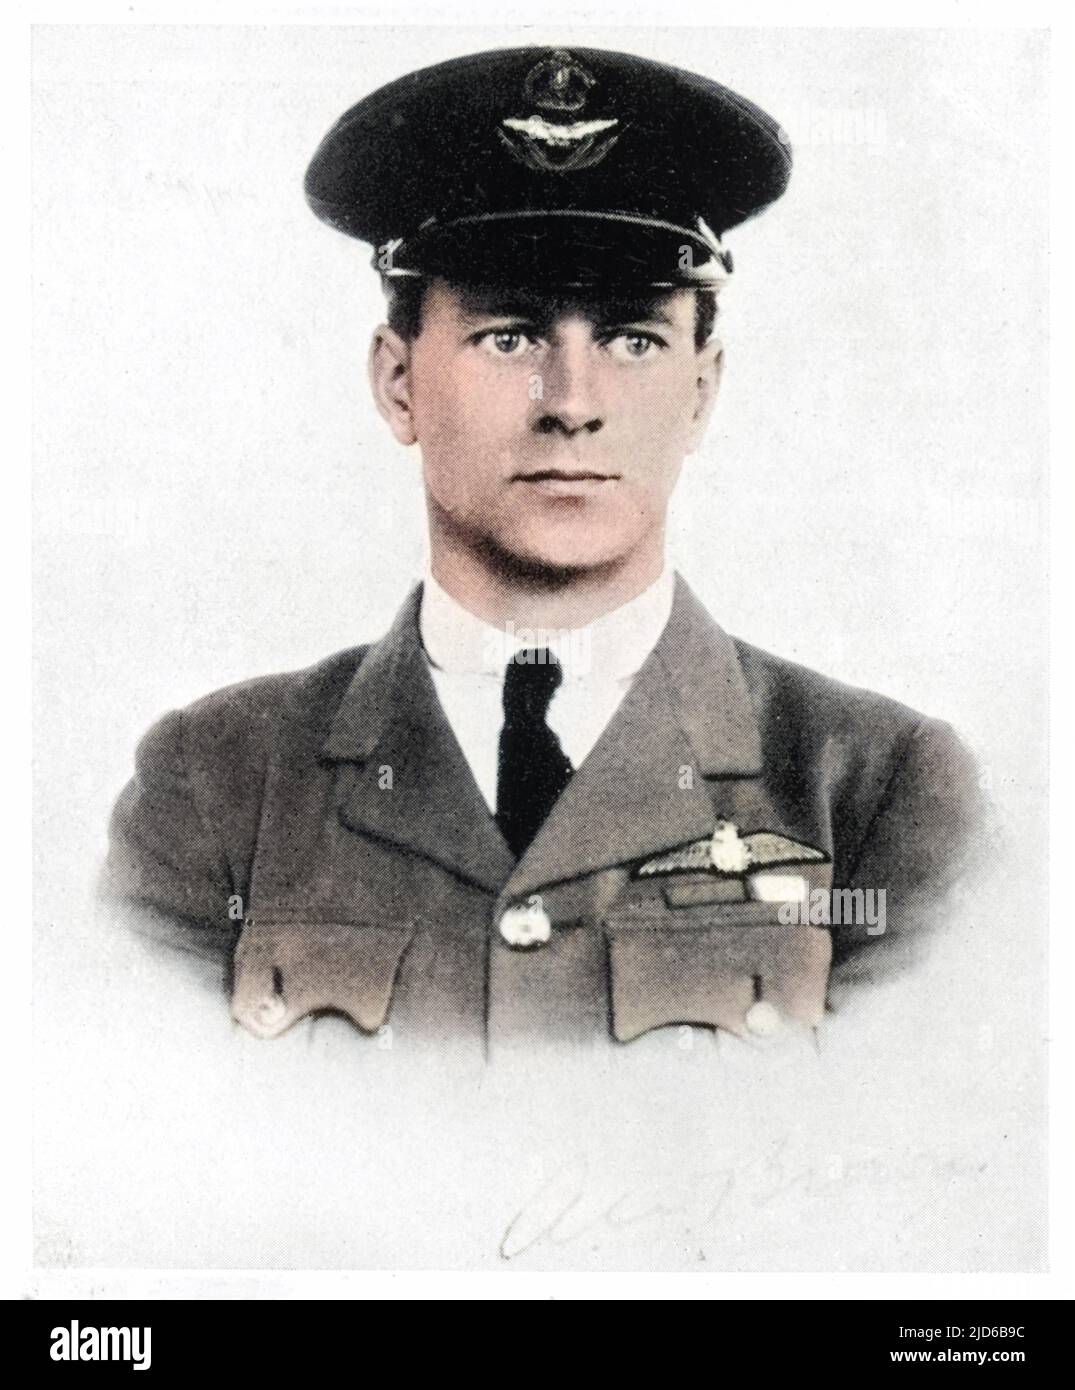 Lieutenant in the Royal Air Force, he was the navigator of the first direct transatlantic flight in June 1919 piloted by Captain John Alcock. Colourised version of : 10164933       Date: 1886 - 1948 Stock Photo